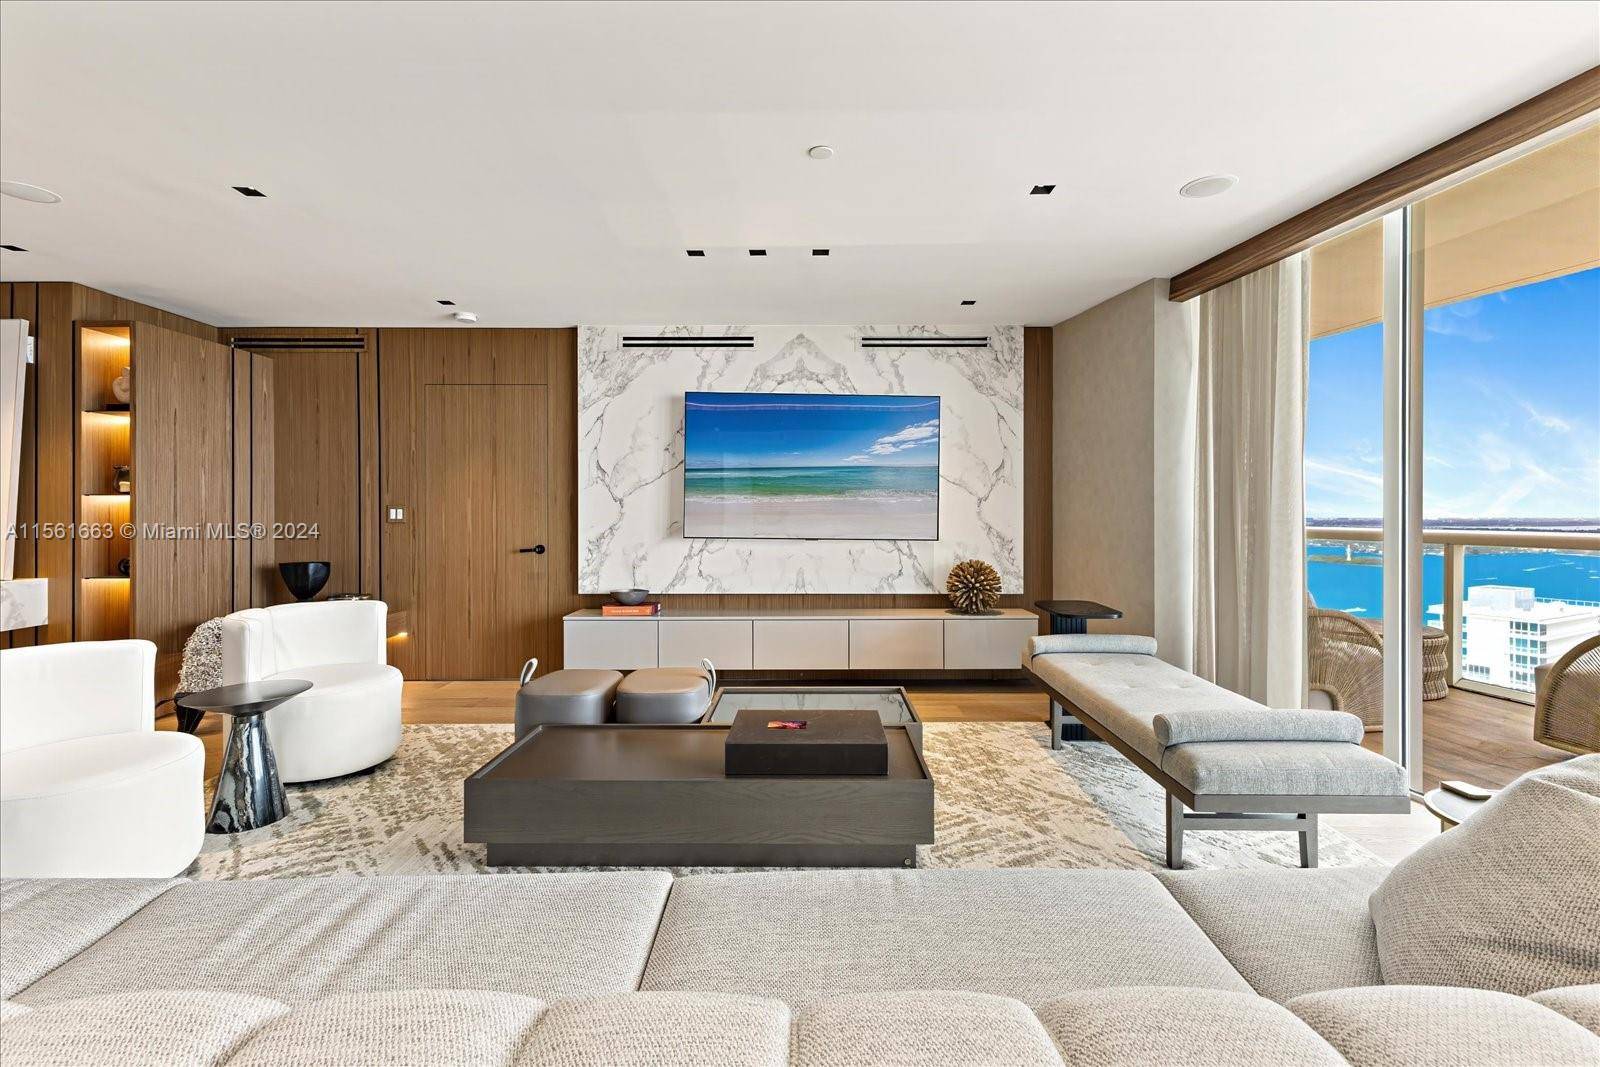 Welcome to the art of home at its finest in the prestigious Icon SoBe.